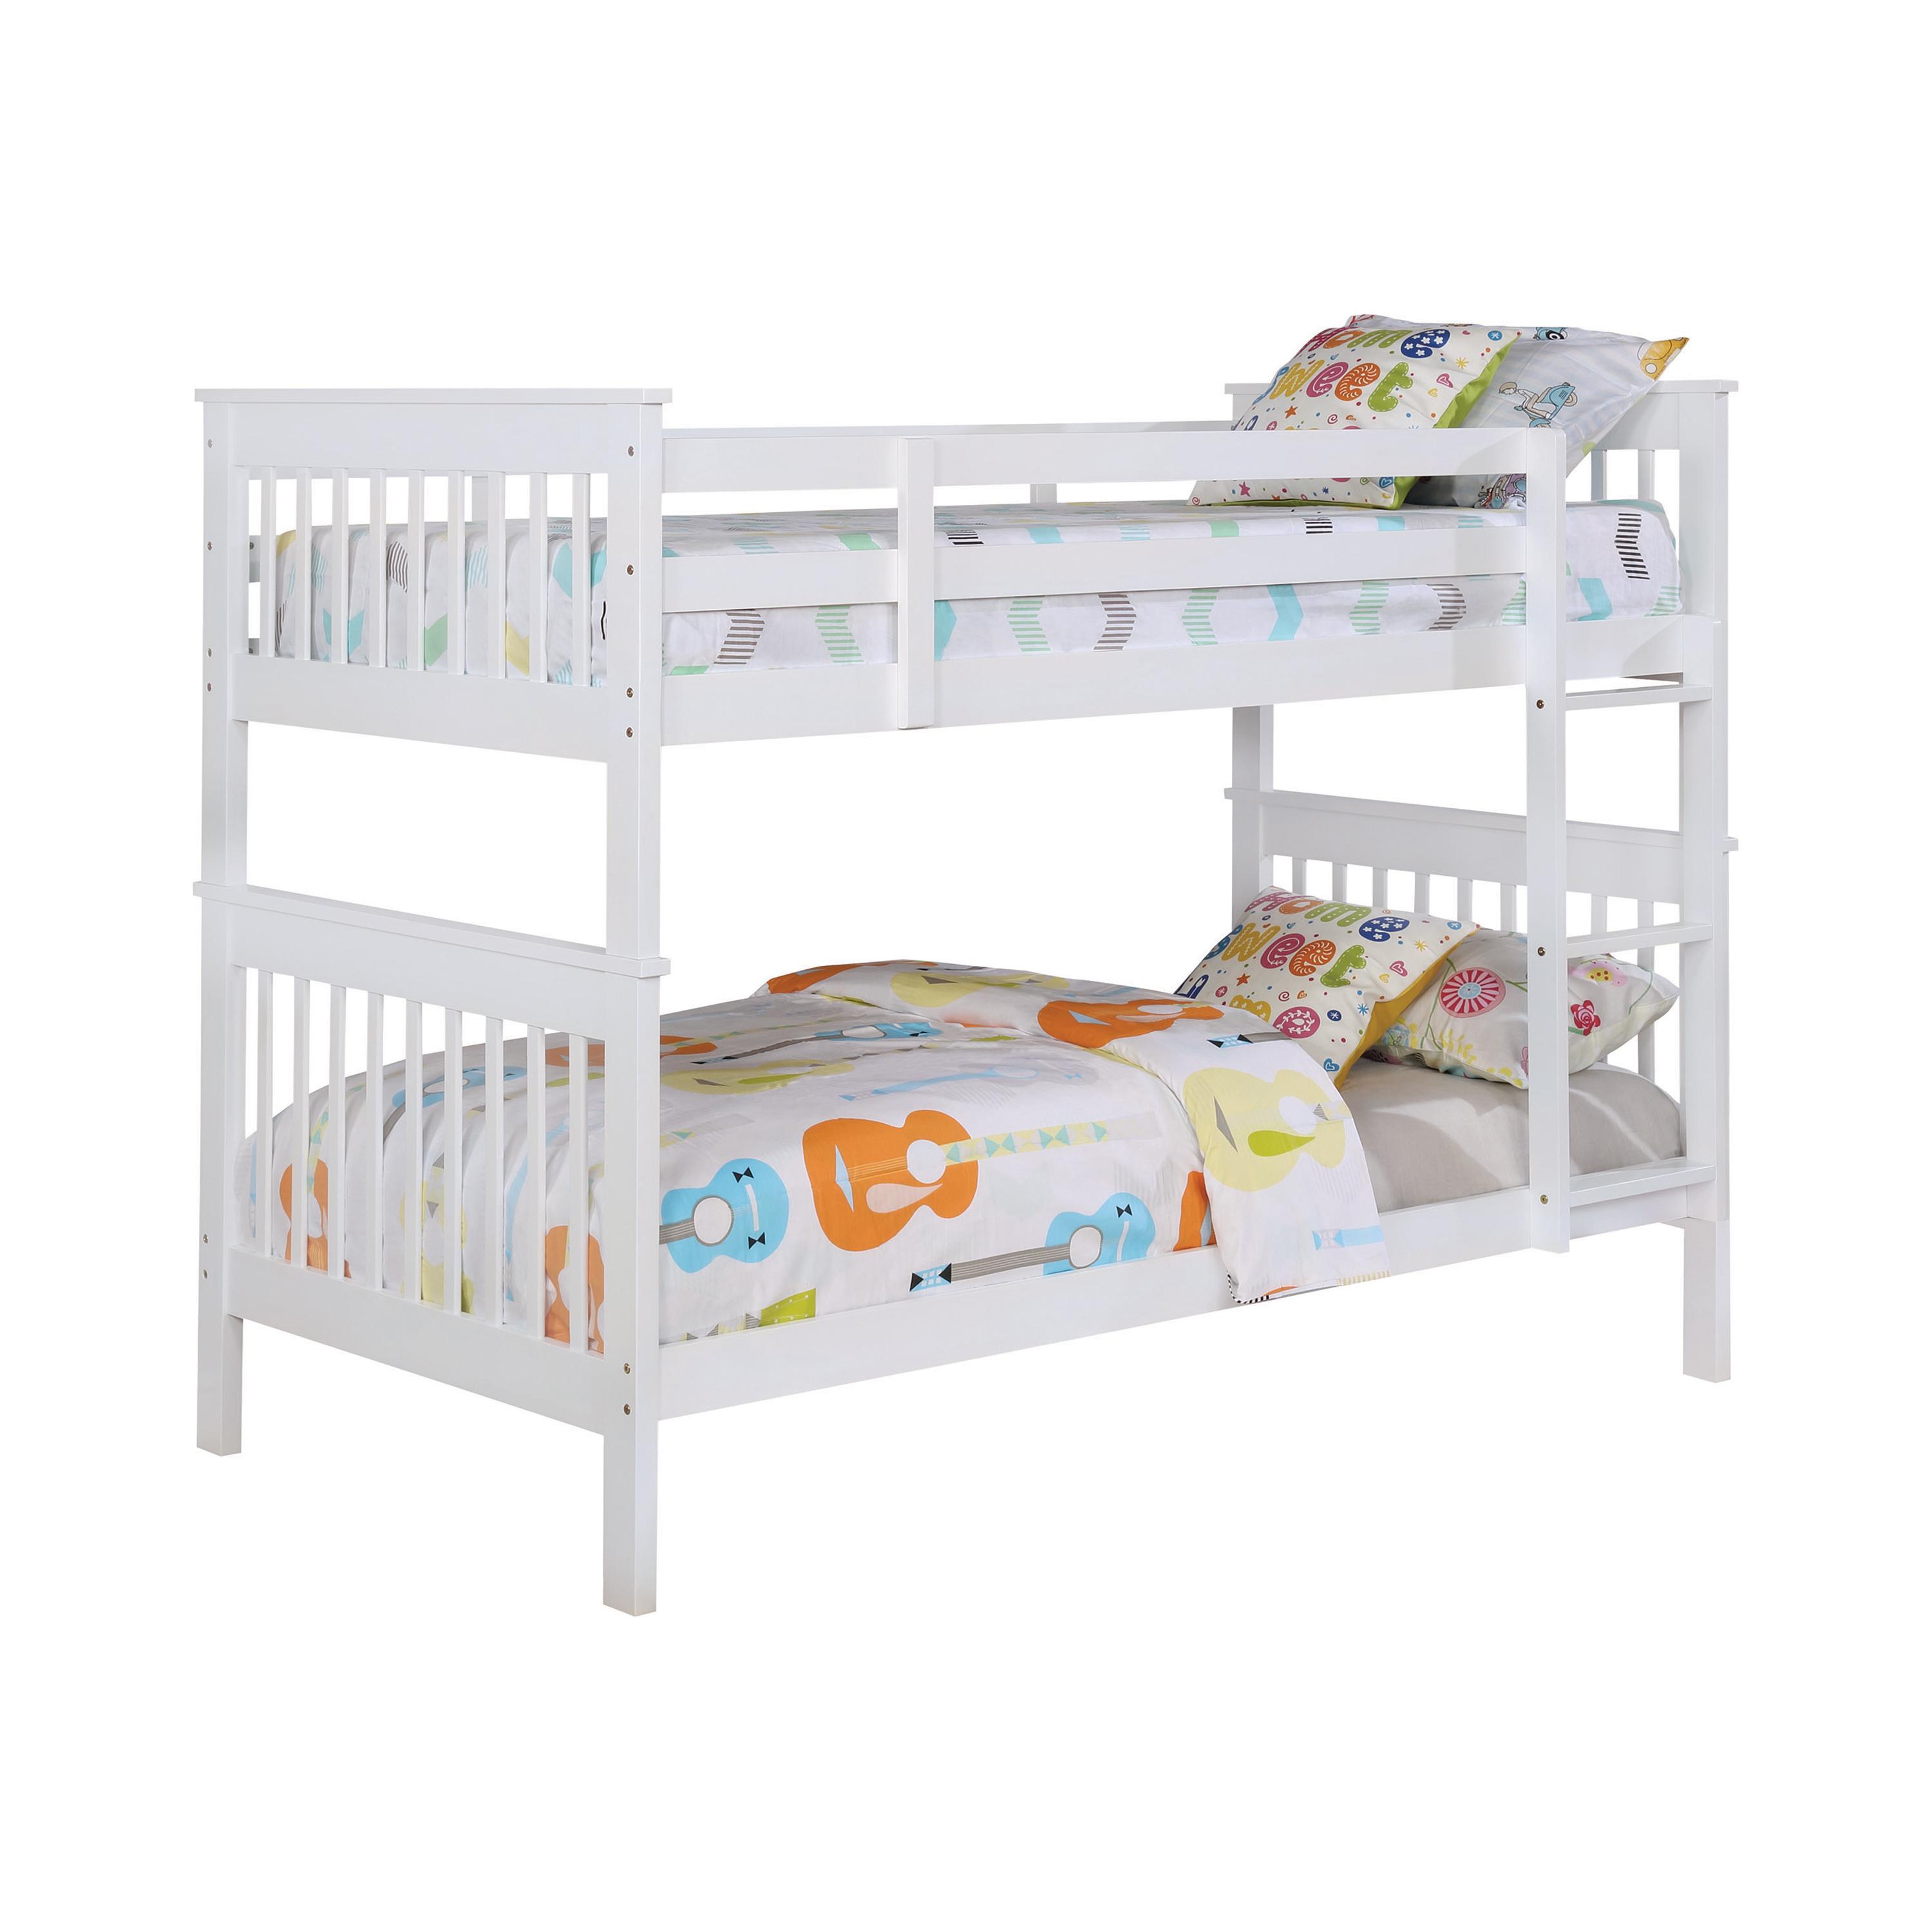 Contemporary Bunk Bed 460244N Chapman 460244N in White 